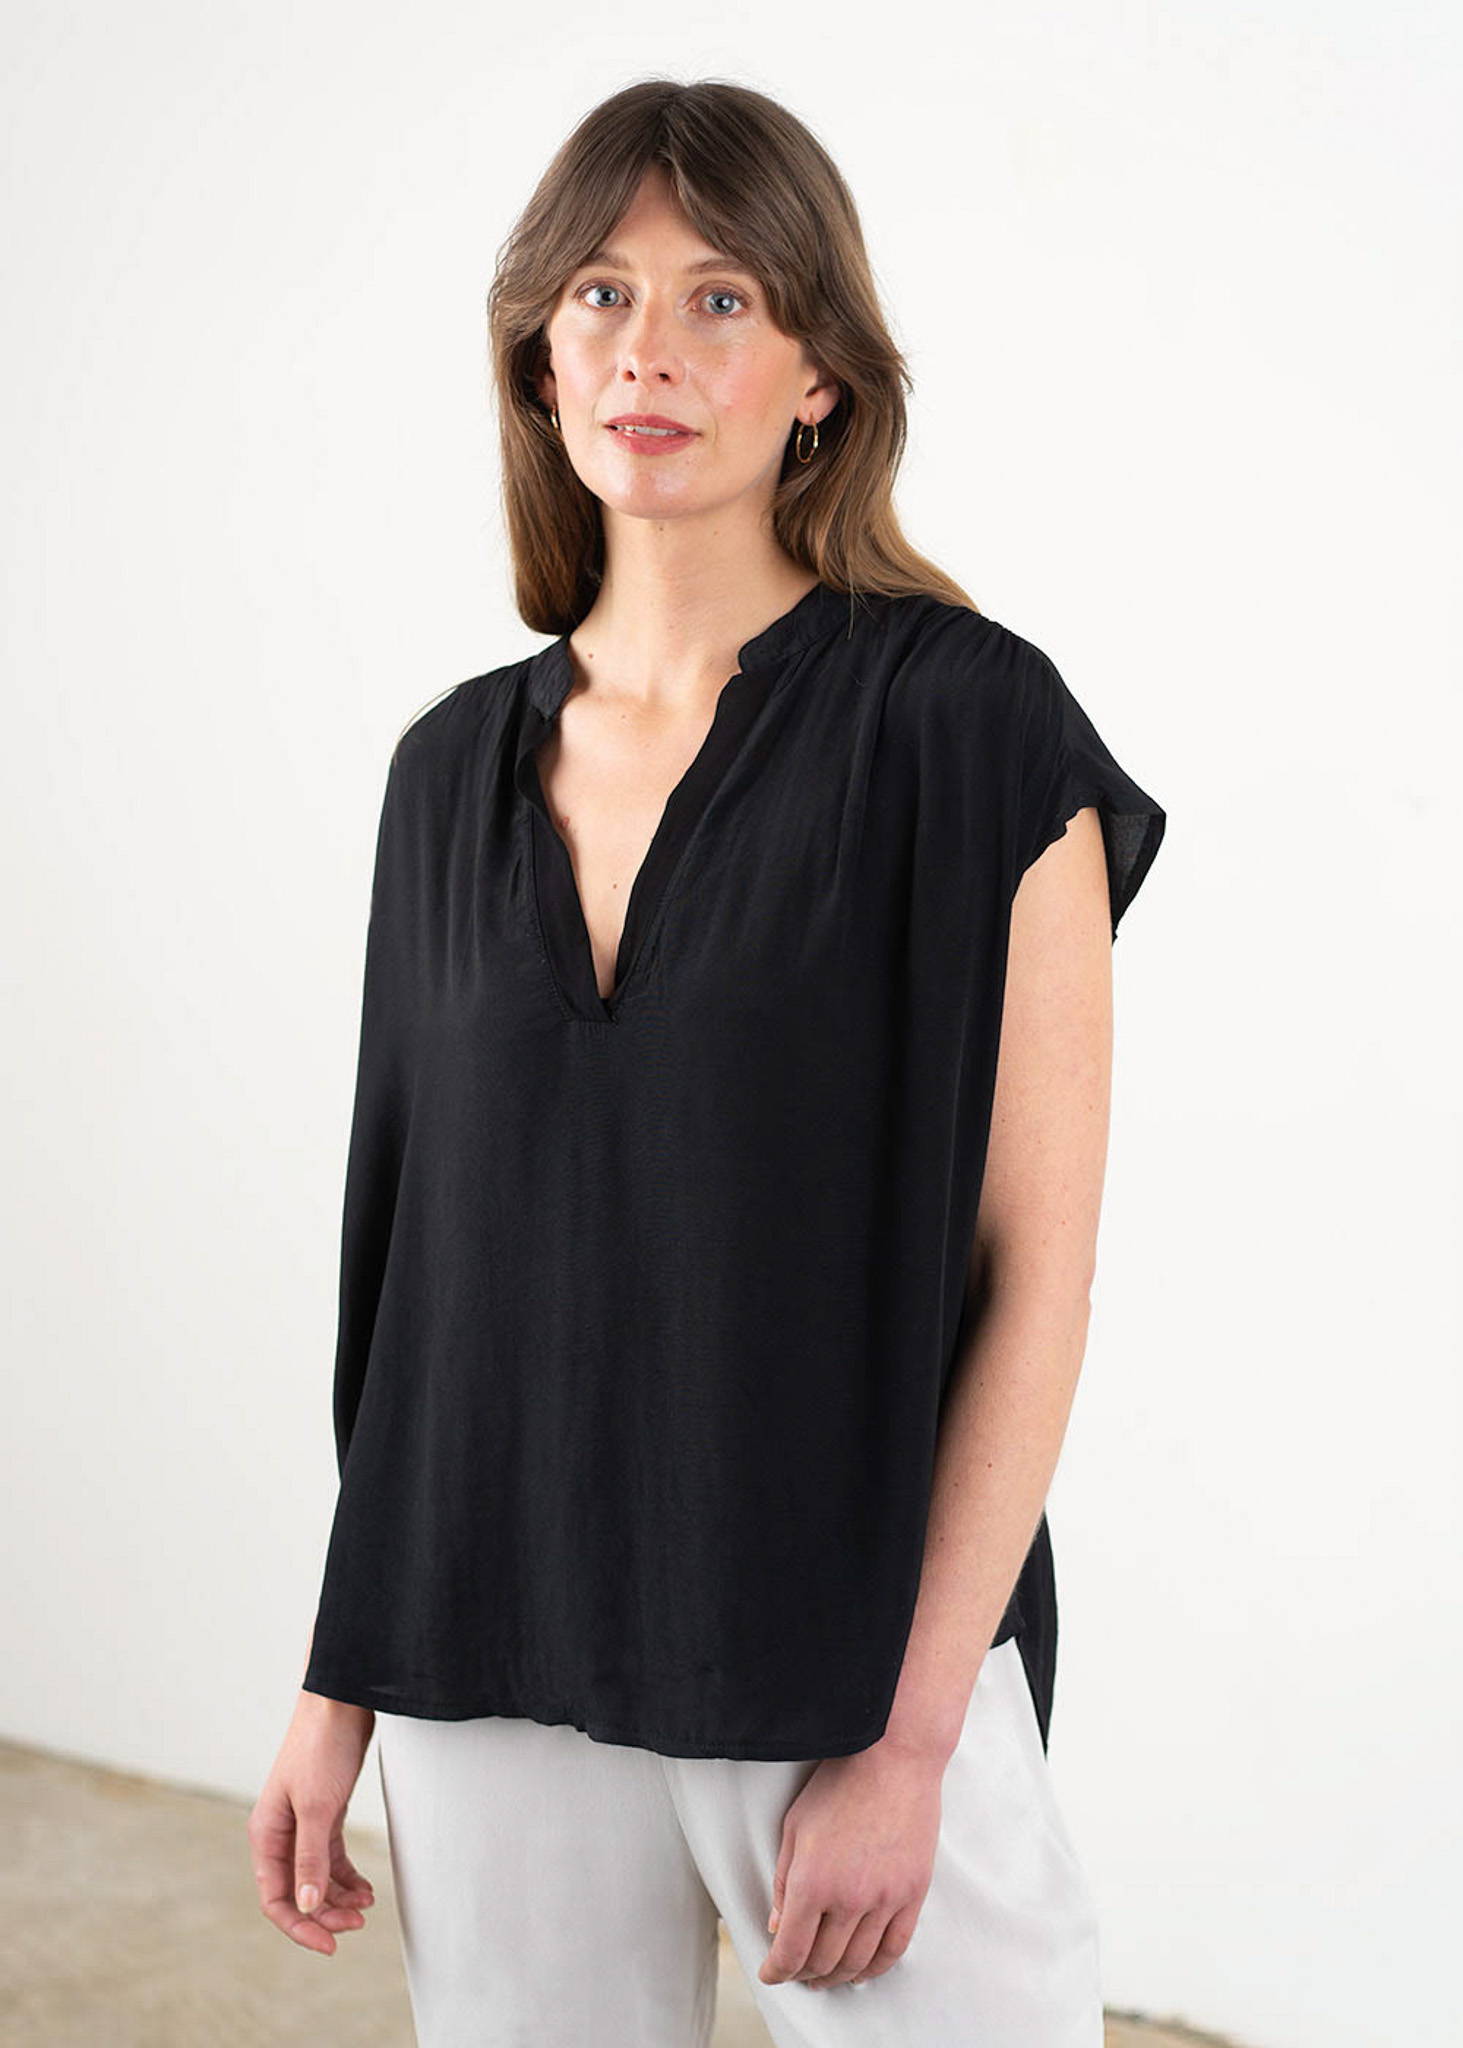 A model weaing a black short sleeved, oversized top with a v neckline.